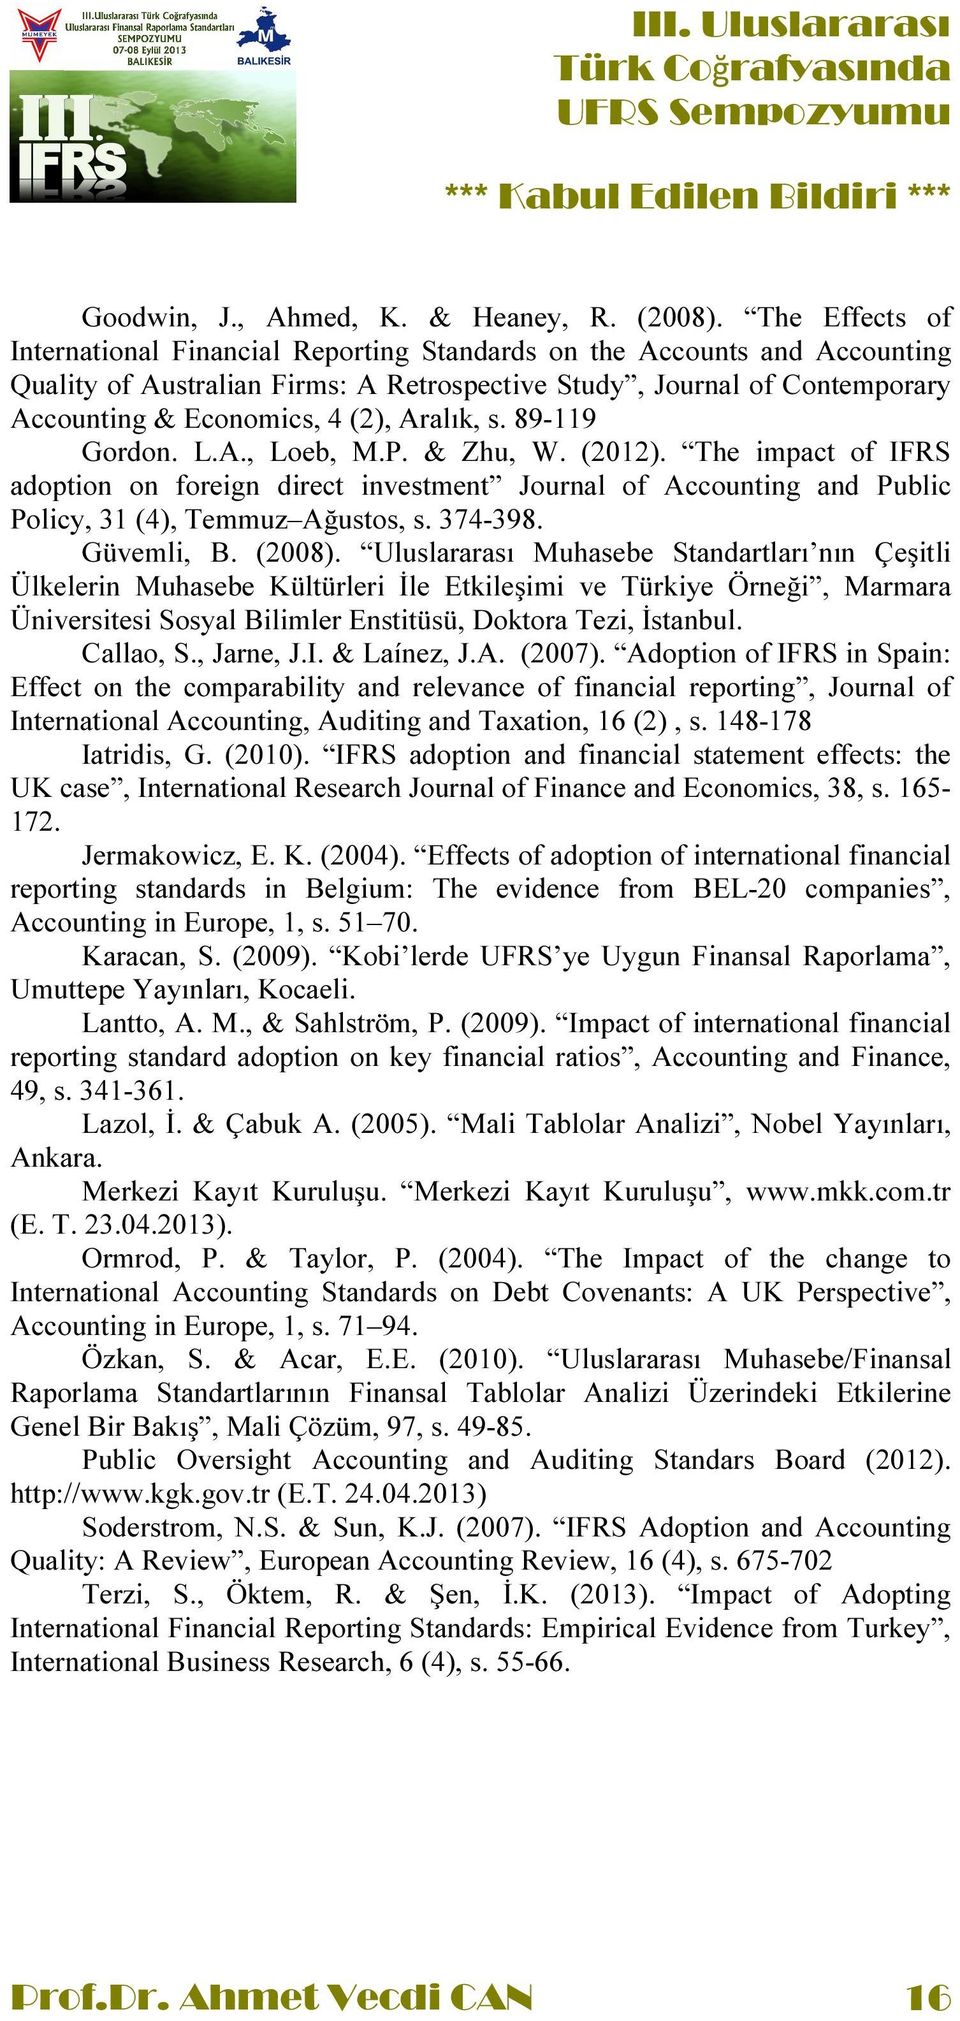 Aralık, s. 89-119 Gordon. L.A., Loeb, M.P. & Zhu, W. (2012). The impact of IFRS adoption on foreign direct investment Journal of Accounting and Public Policy, 31 (4), Temmuz Ağustos, s. 374-398.